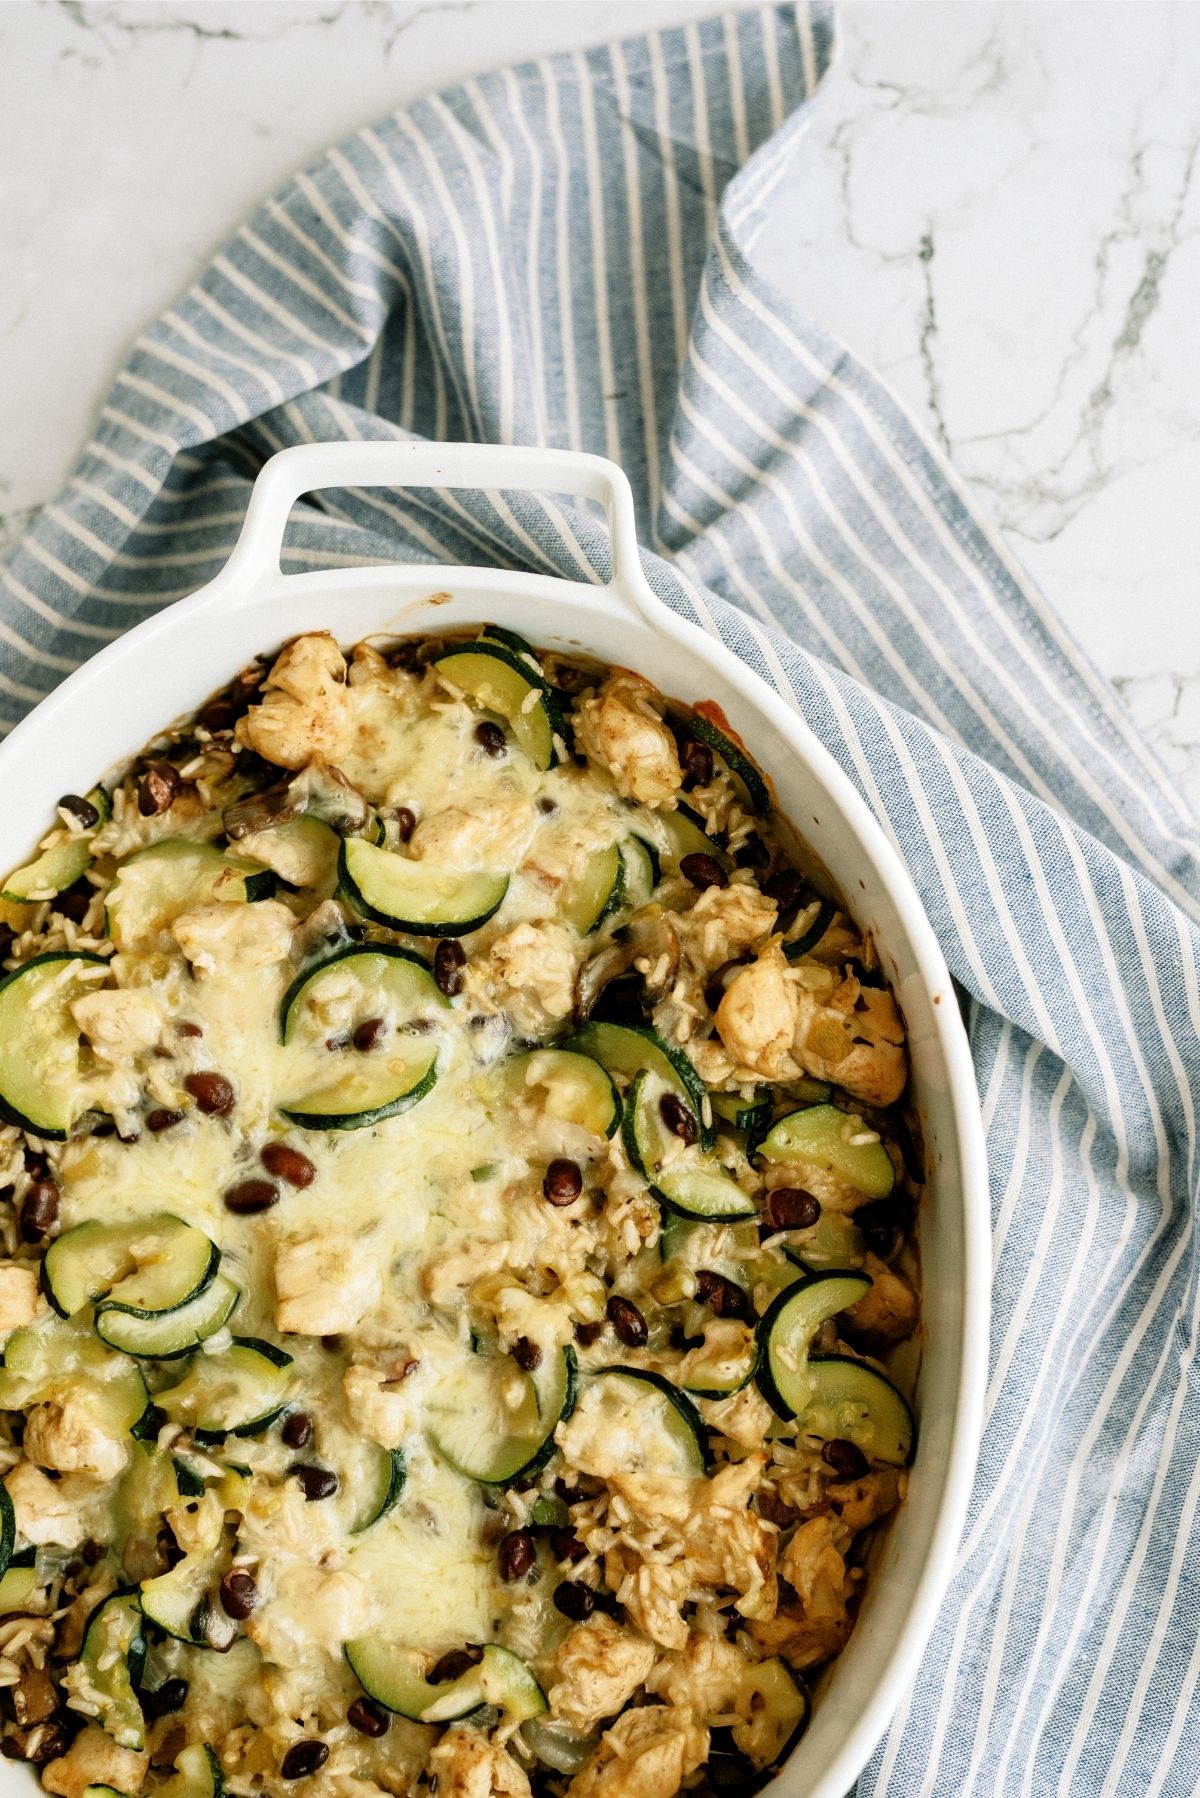 Baked Chicken and Black Bean Casserole in a white casserole dish